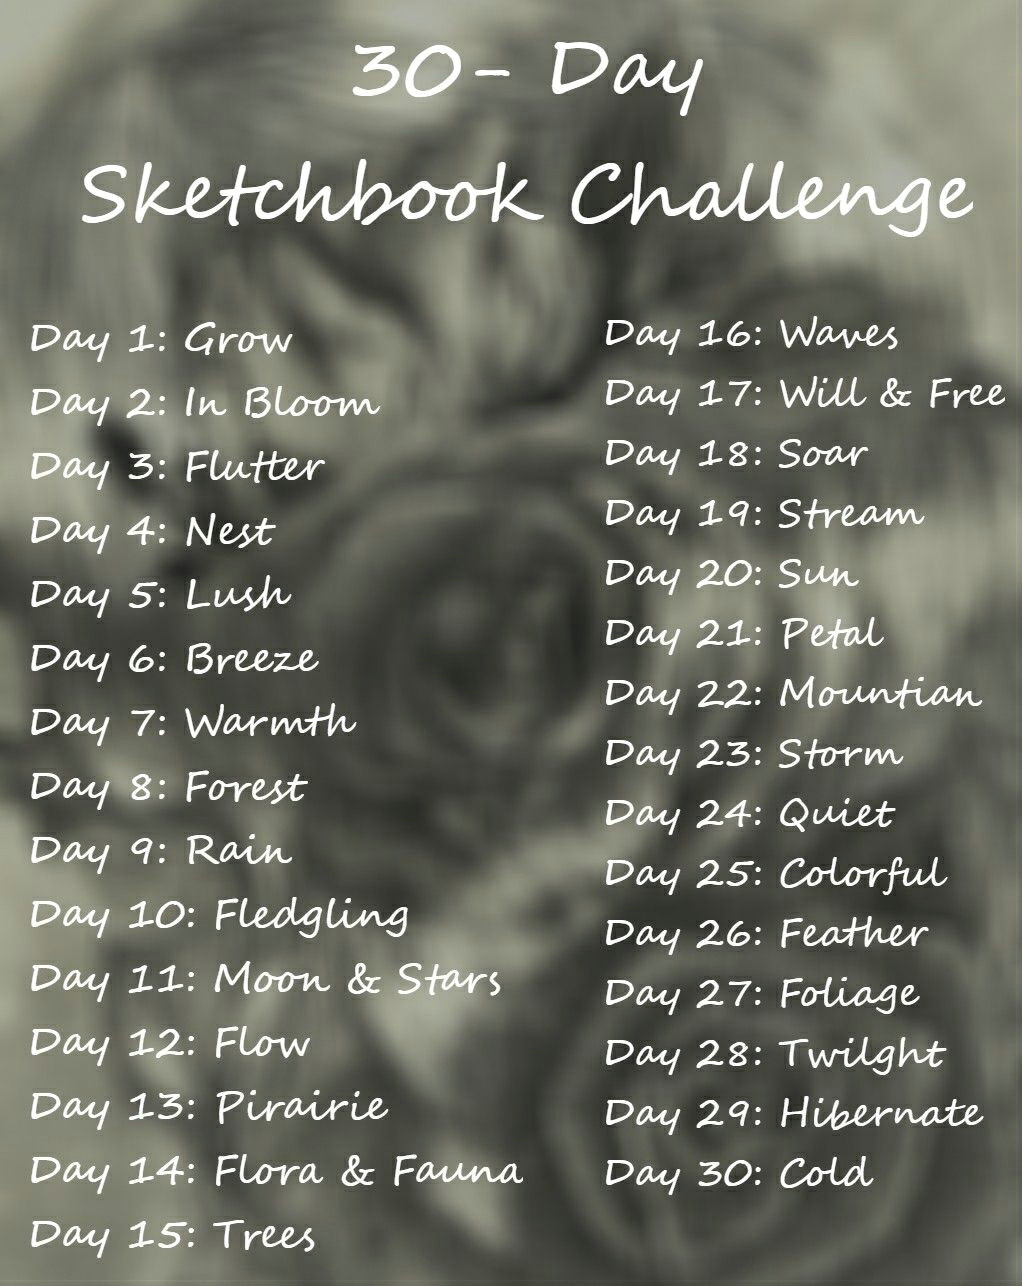 starting june 1st i am doing a 30 day sketchbook challenge to see first video